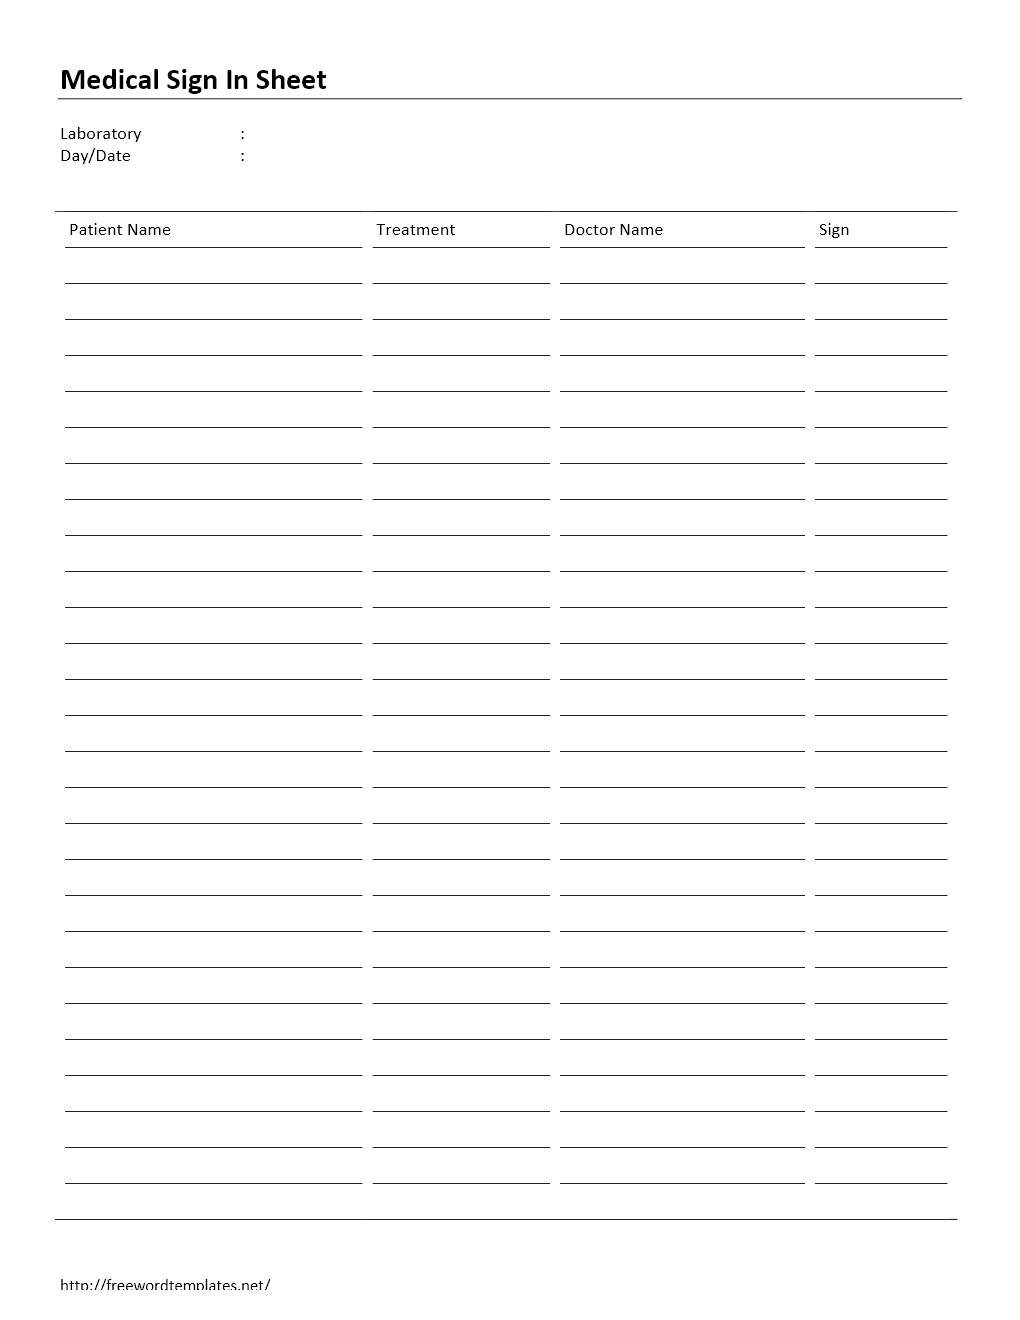 Medical Sign In Sheet Template